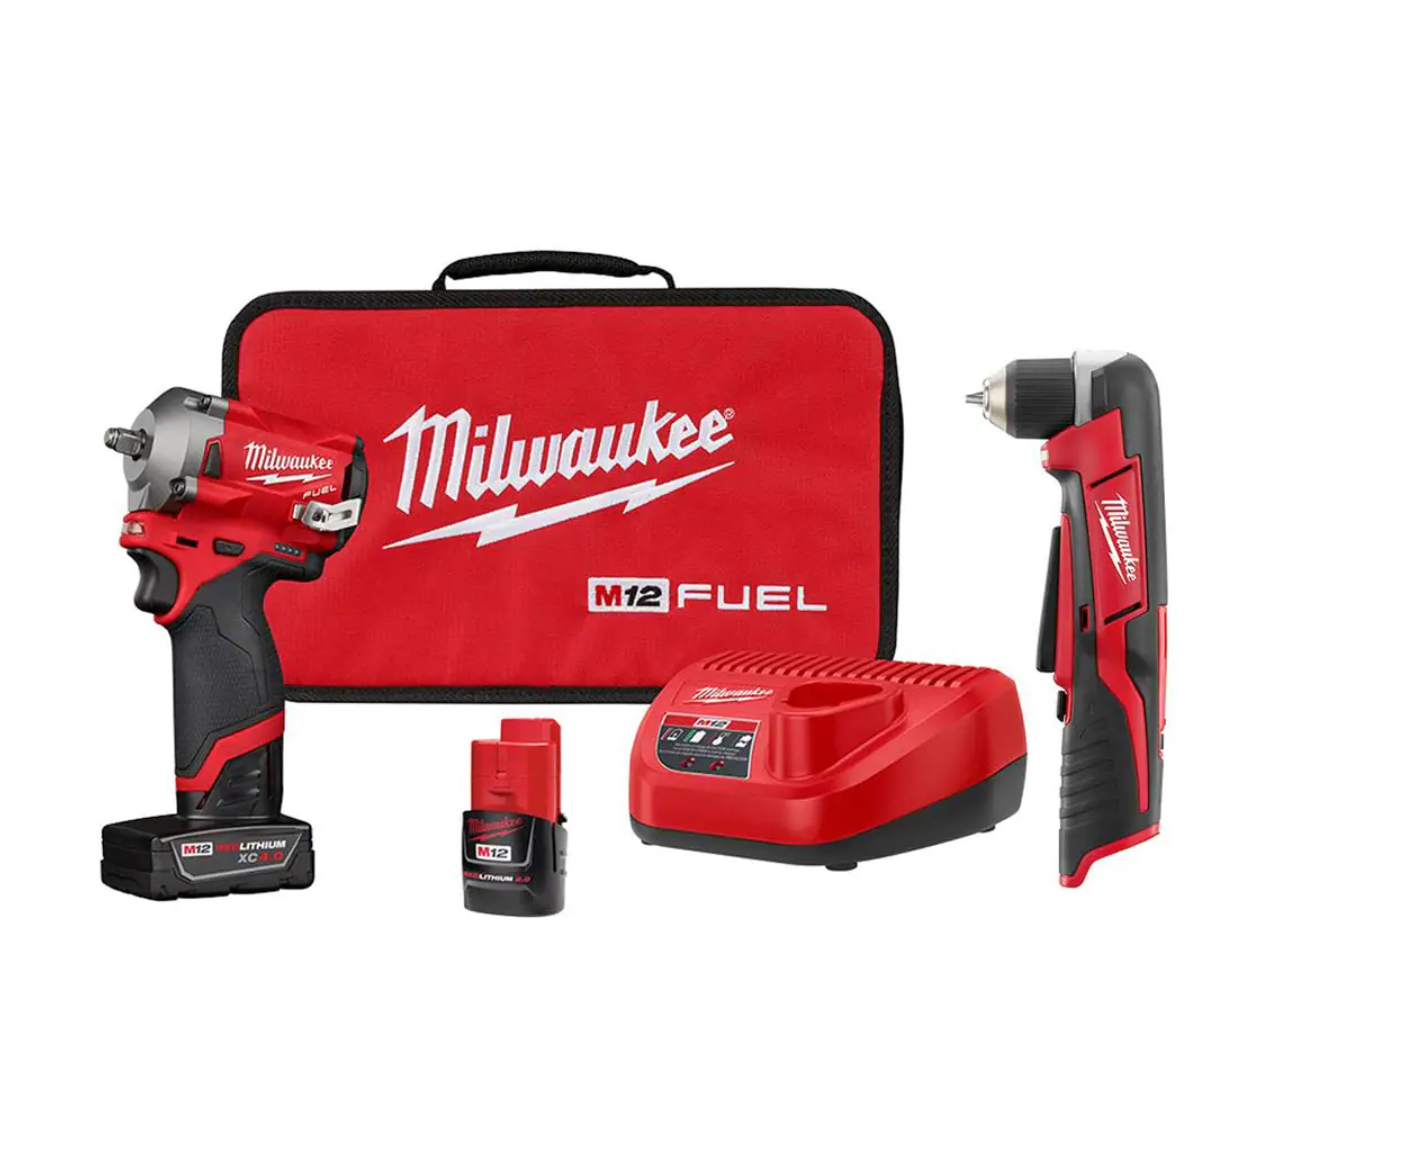 M12 FUEL 12V Lithium-Ion Brushless Cordless 3/8-inch Right Angle Impact  Wrench (Tool Only)